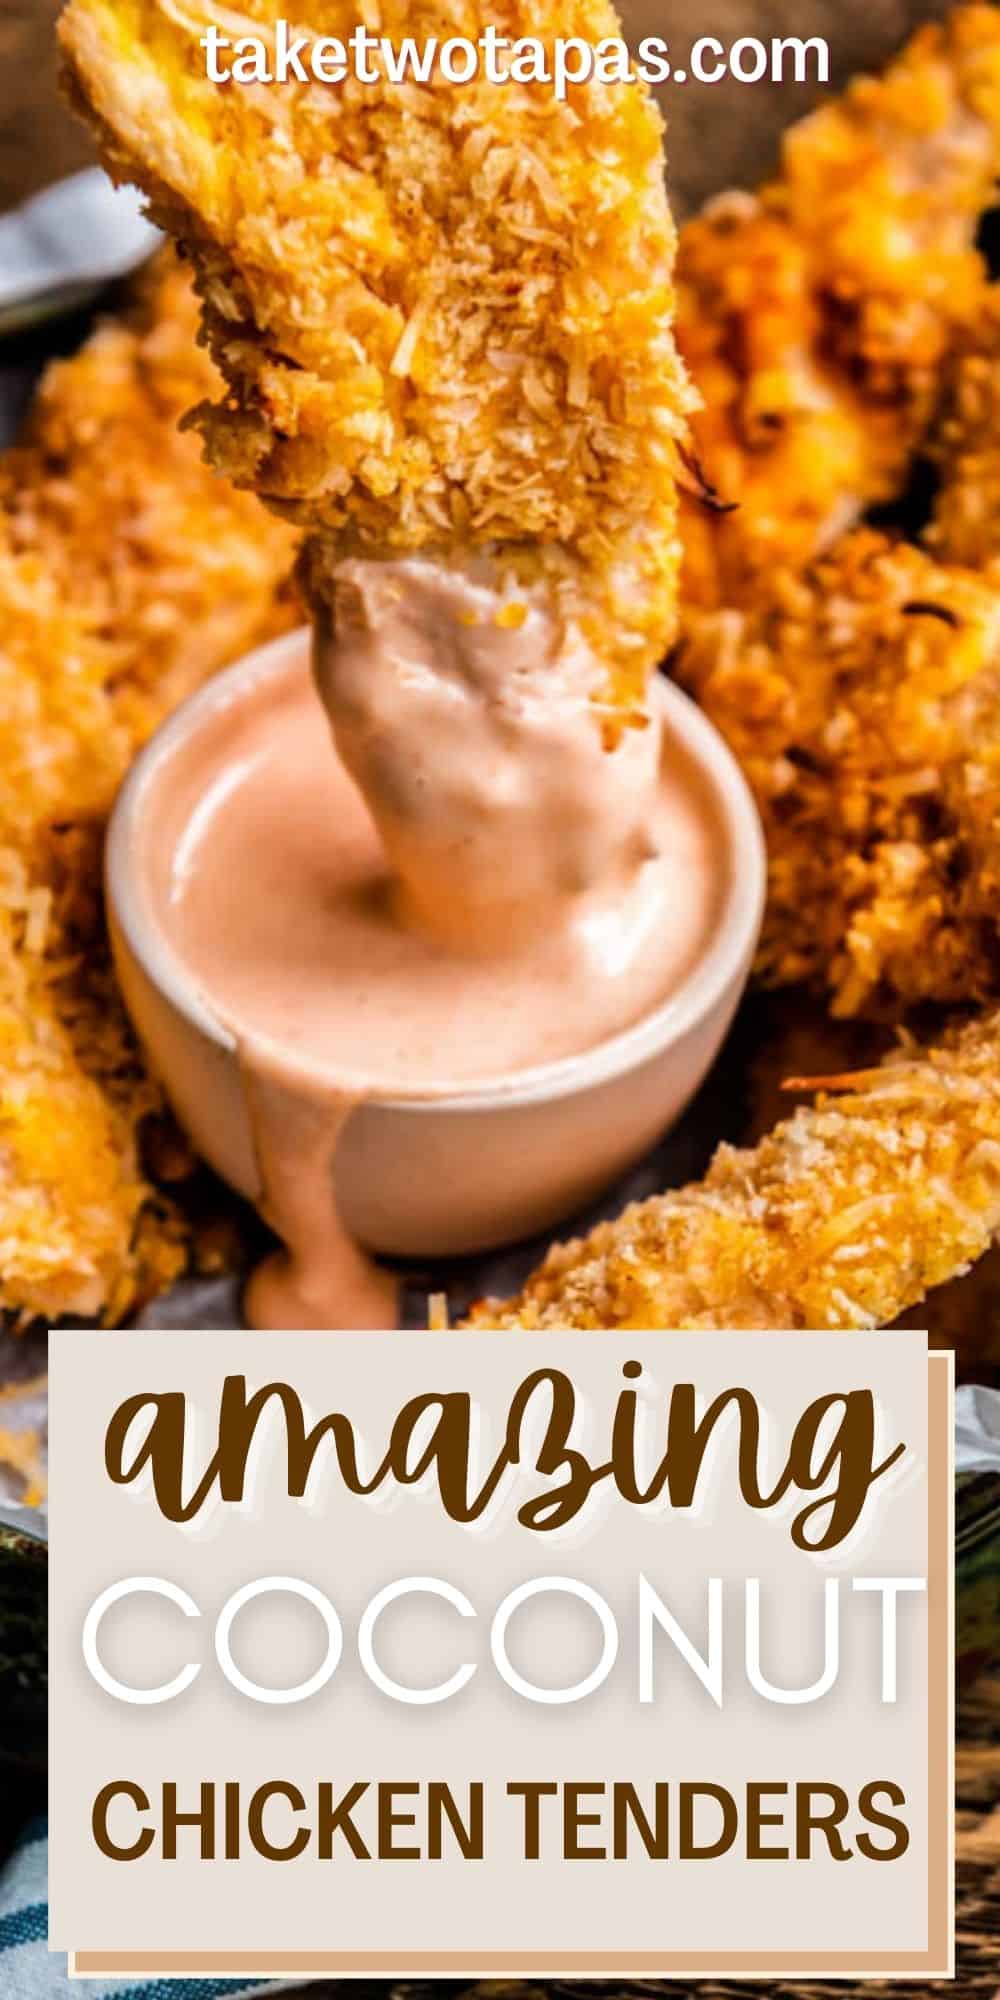 collage of chicken with text "amazing coconut chicken tenders"